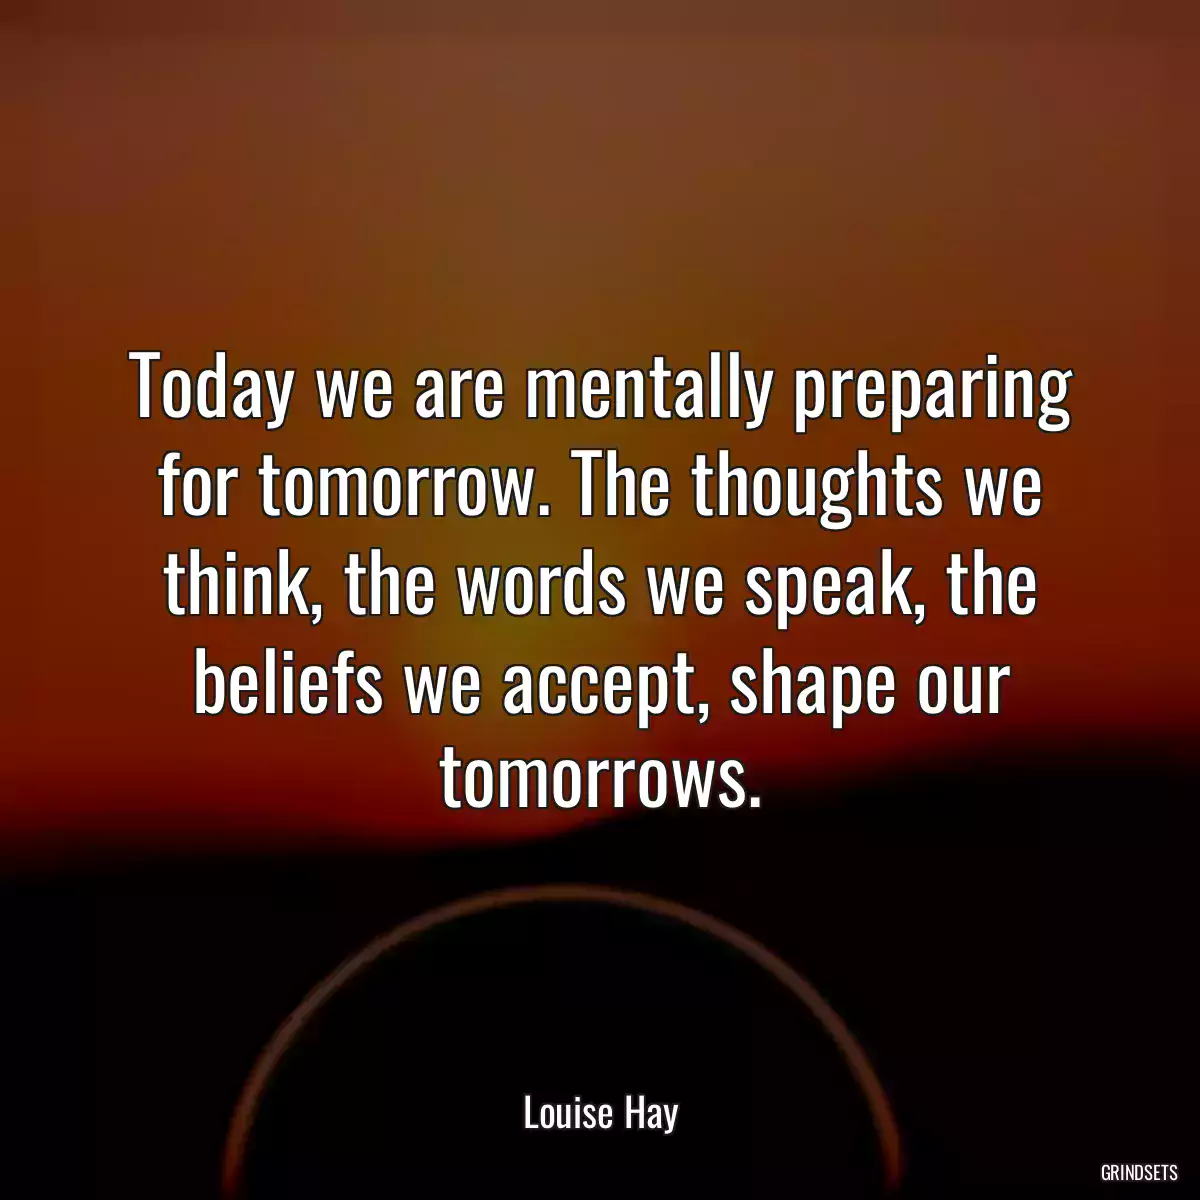 Today we are mentally preparing for tomorrow. The thoughts we think, the words we speak, the beliefs we accept, shape our tomorrows.